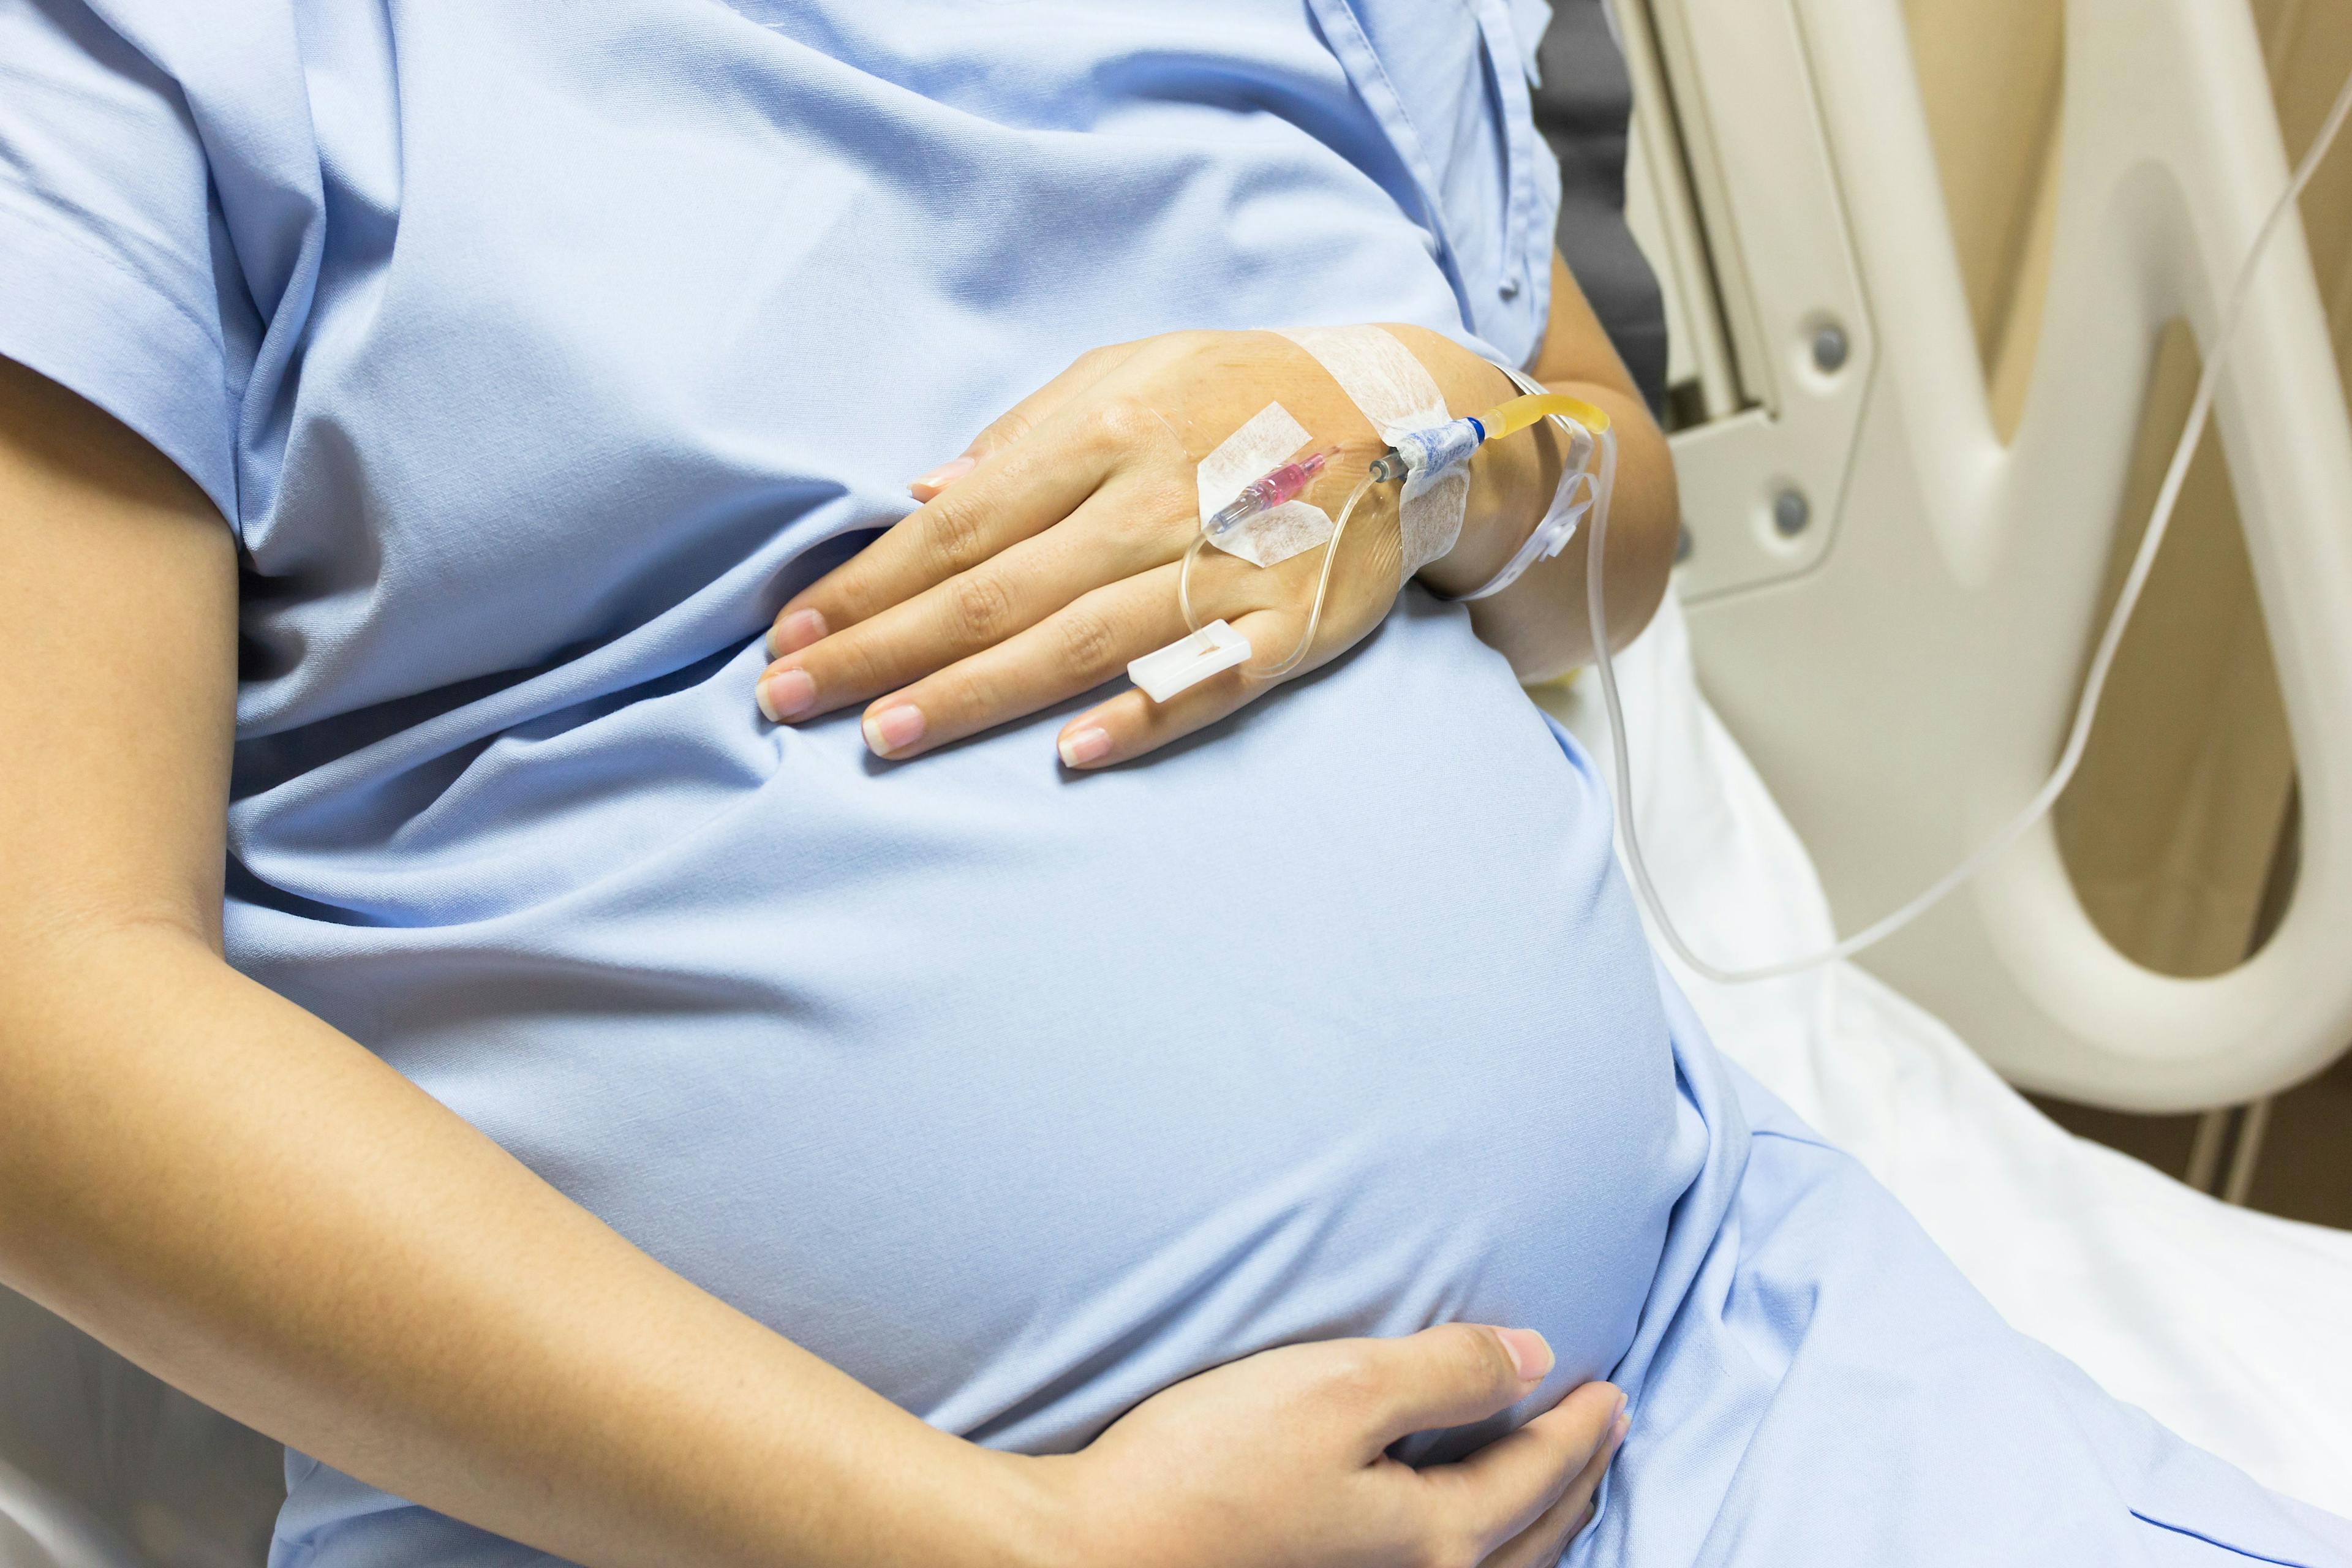 Risk of delivery complications higher in women with previous or current cancer diagnoses